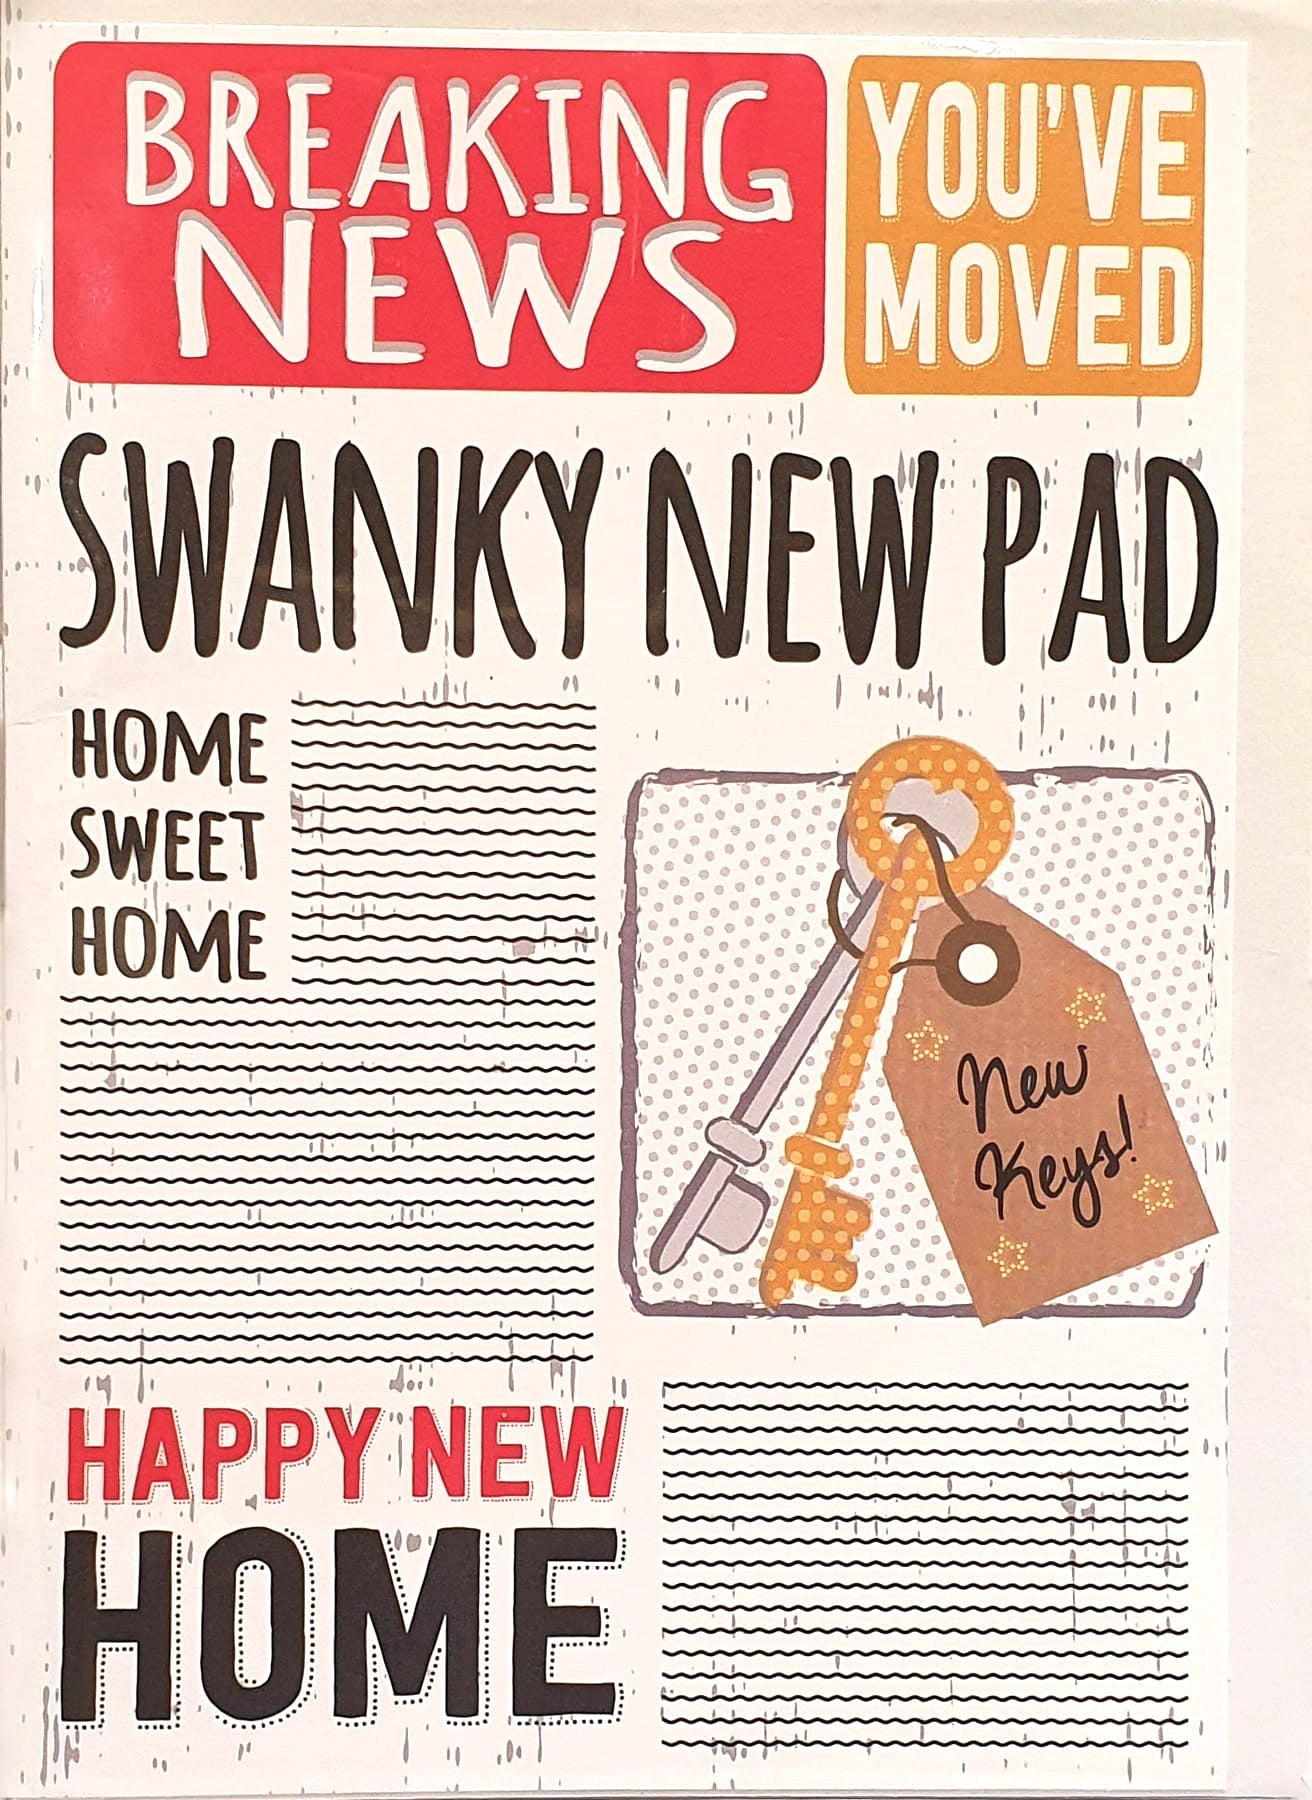 Humorous New Home Card - Breaking News Front Page